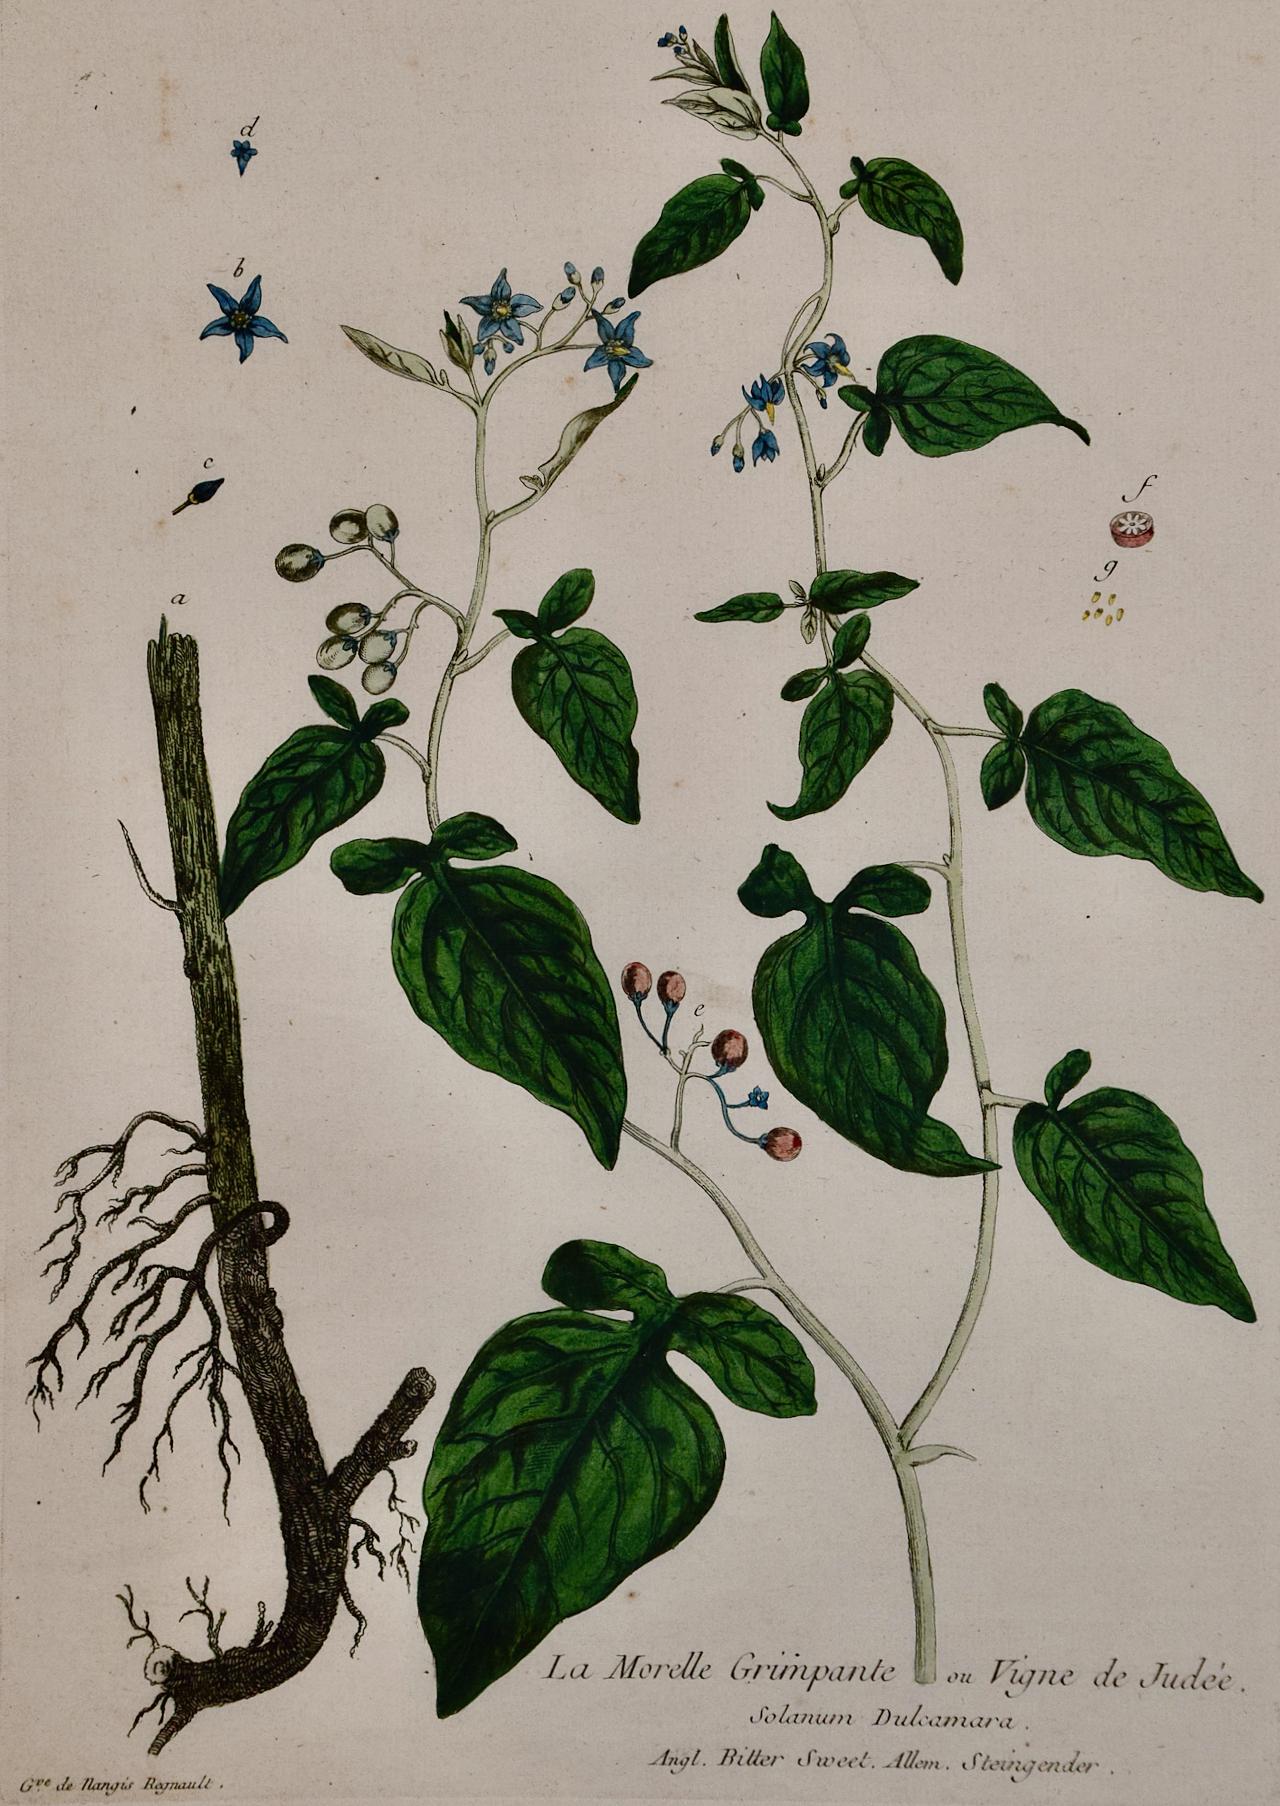 Bittersweet Nightshade: An 18th C. Hand-colored Botanical Engraving by Regnault  - Print by Genevive de Nangis-Regnault